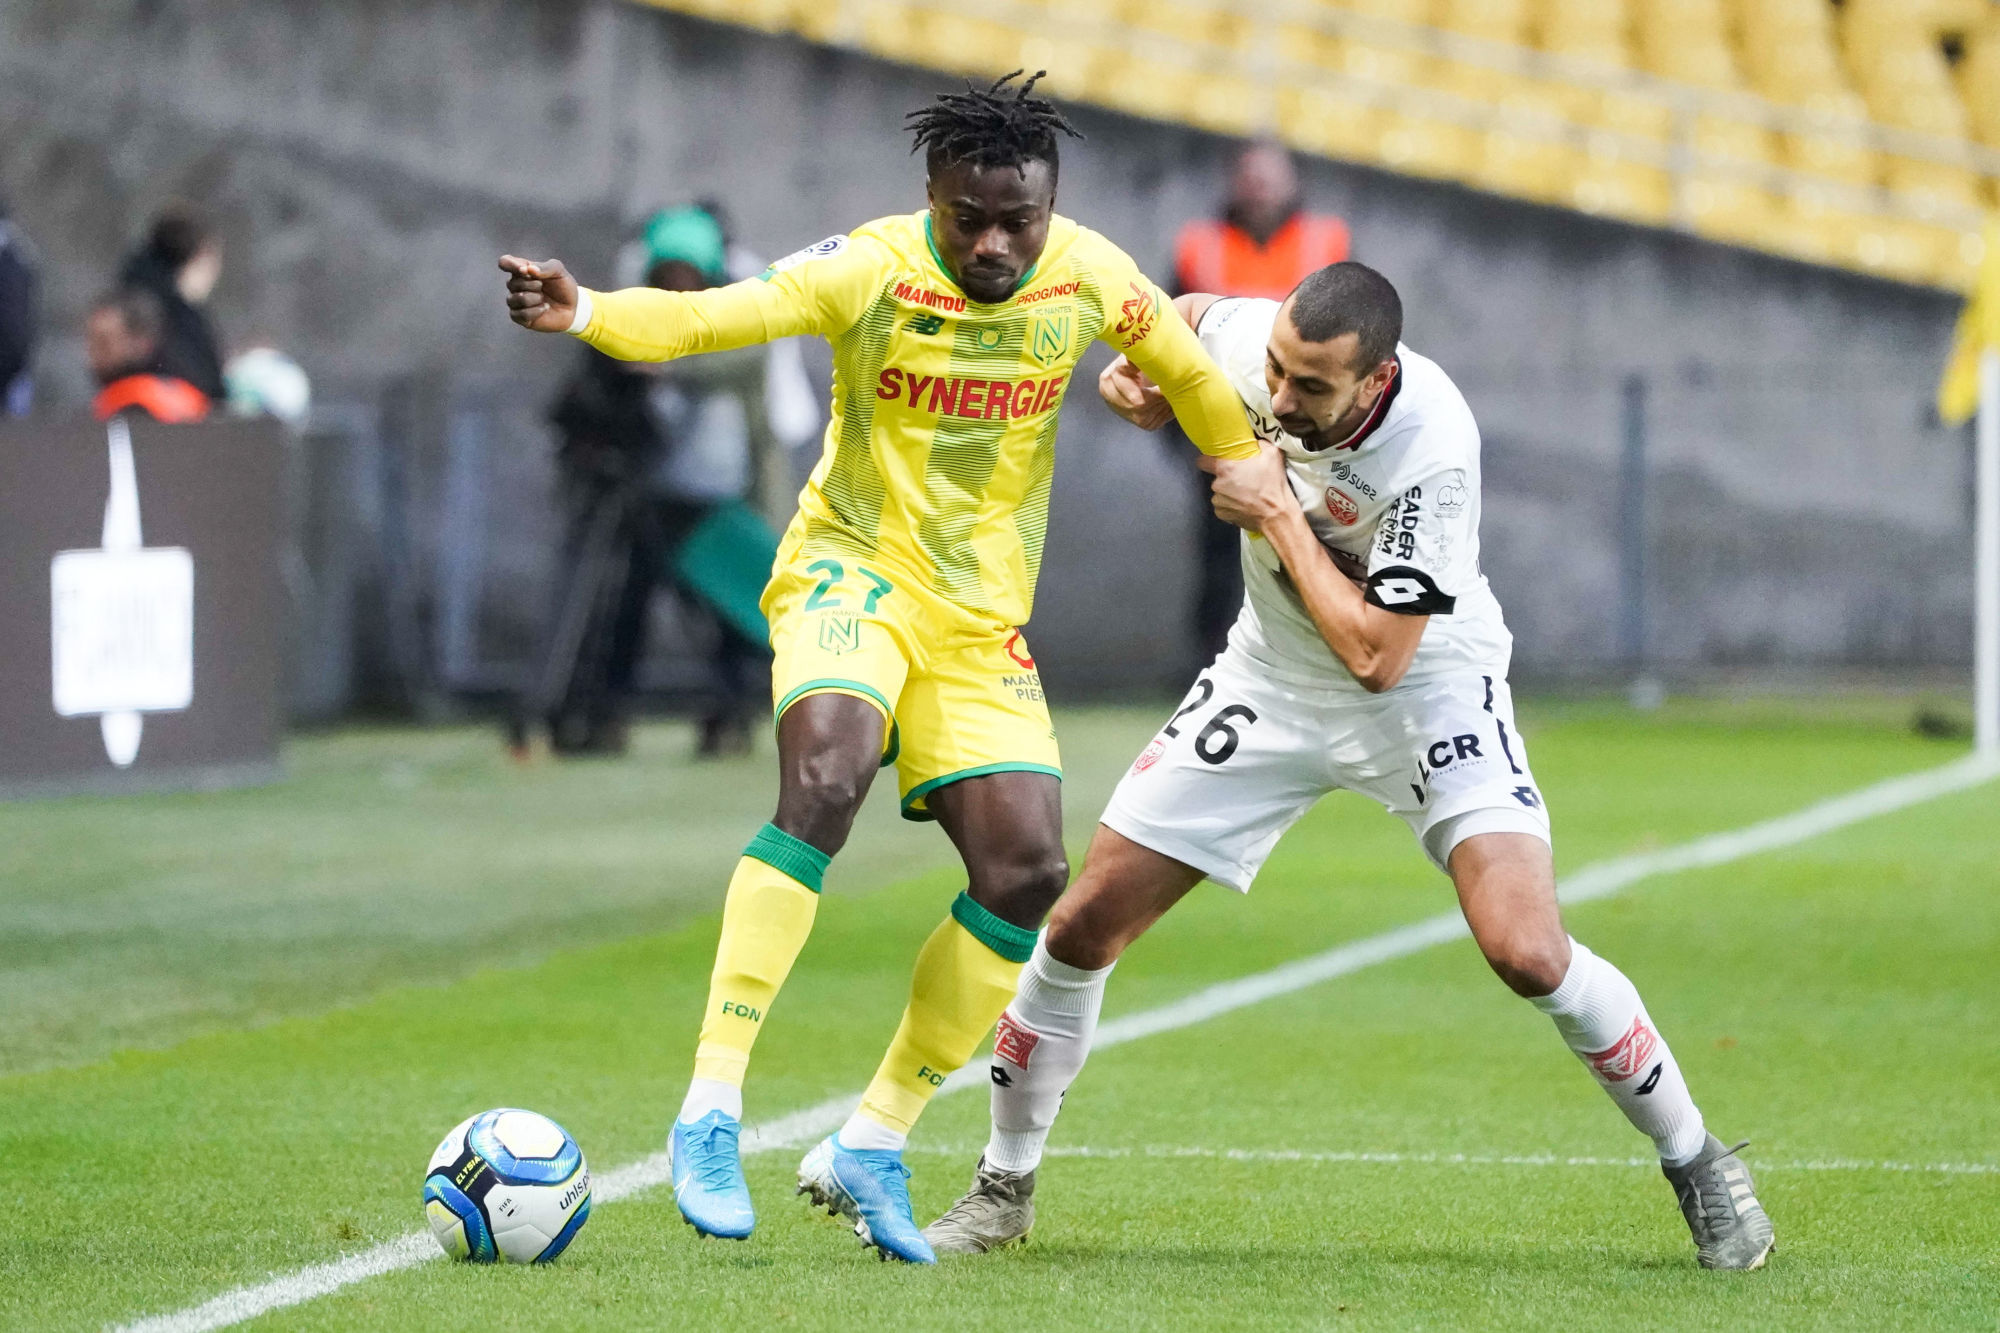 Moses SIMON of Nantes and Fouad CHAFIK of Dijon during the Ligue 1 match between FC Nantes and Dijon FCO at Stade de la Beaujoire on December 7, 2019 in Nantes, France. (Photo by Eddy Lemaistre/Icon Sport) - Stade de La Beaujoire - Louis Fonteneau - Nantes (France)